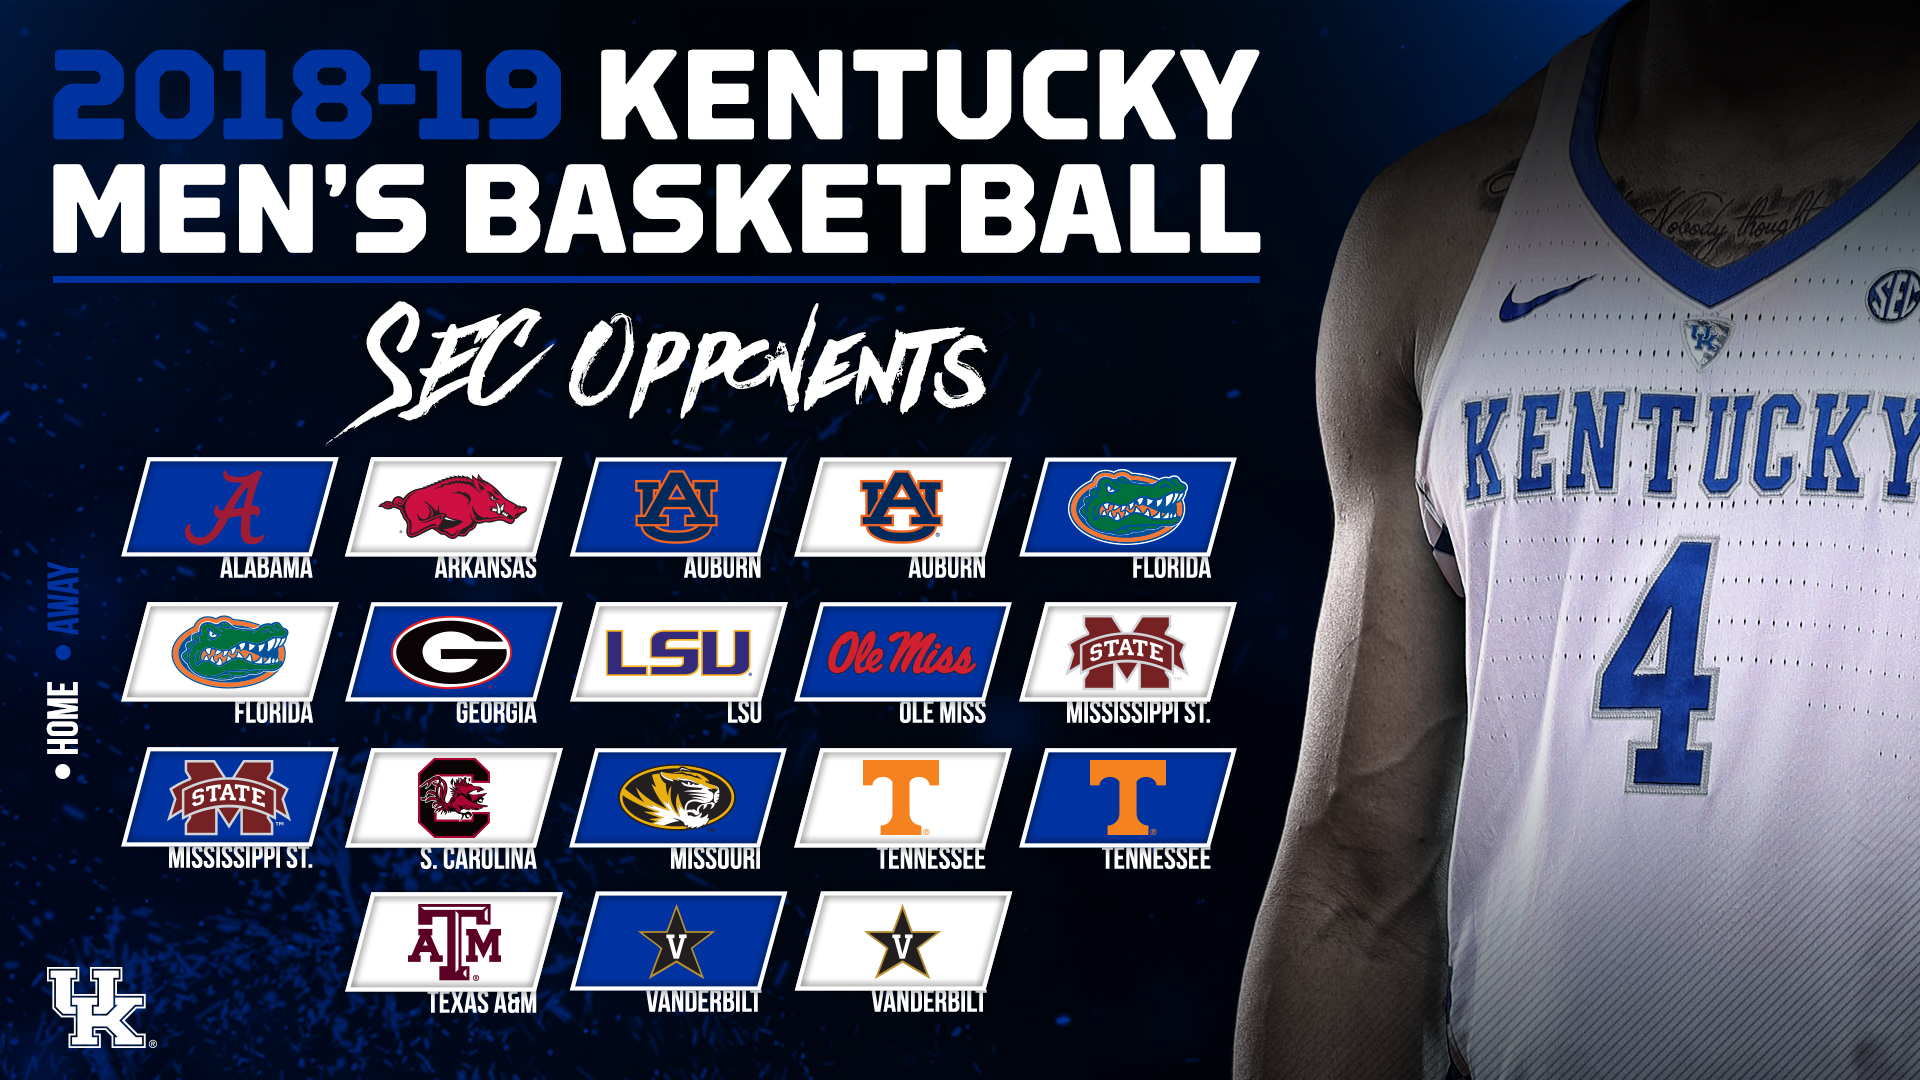 UK Men’s Basketball Conference Opponents Announced for 2018-19